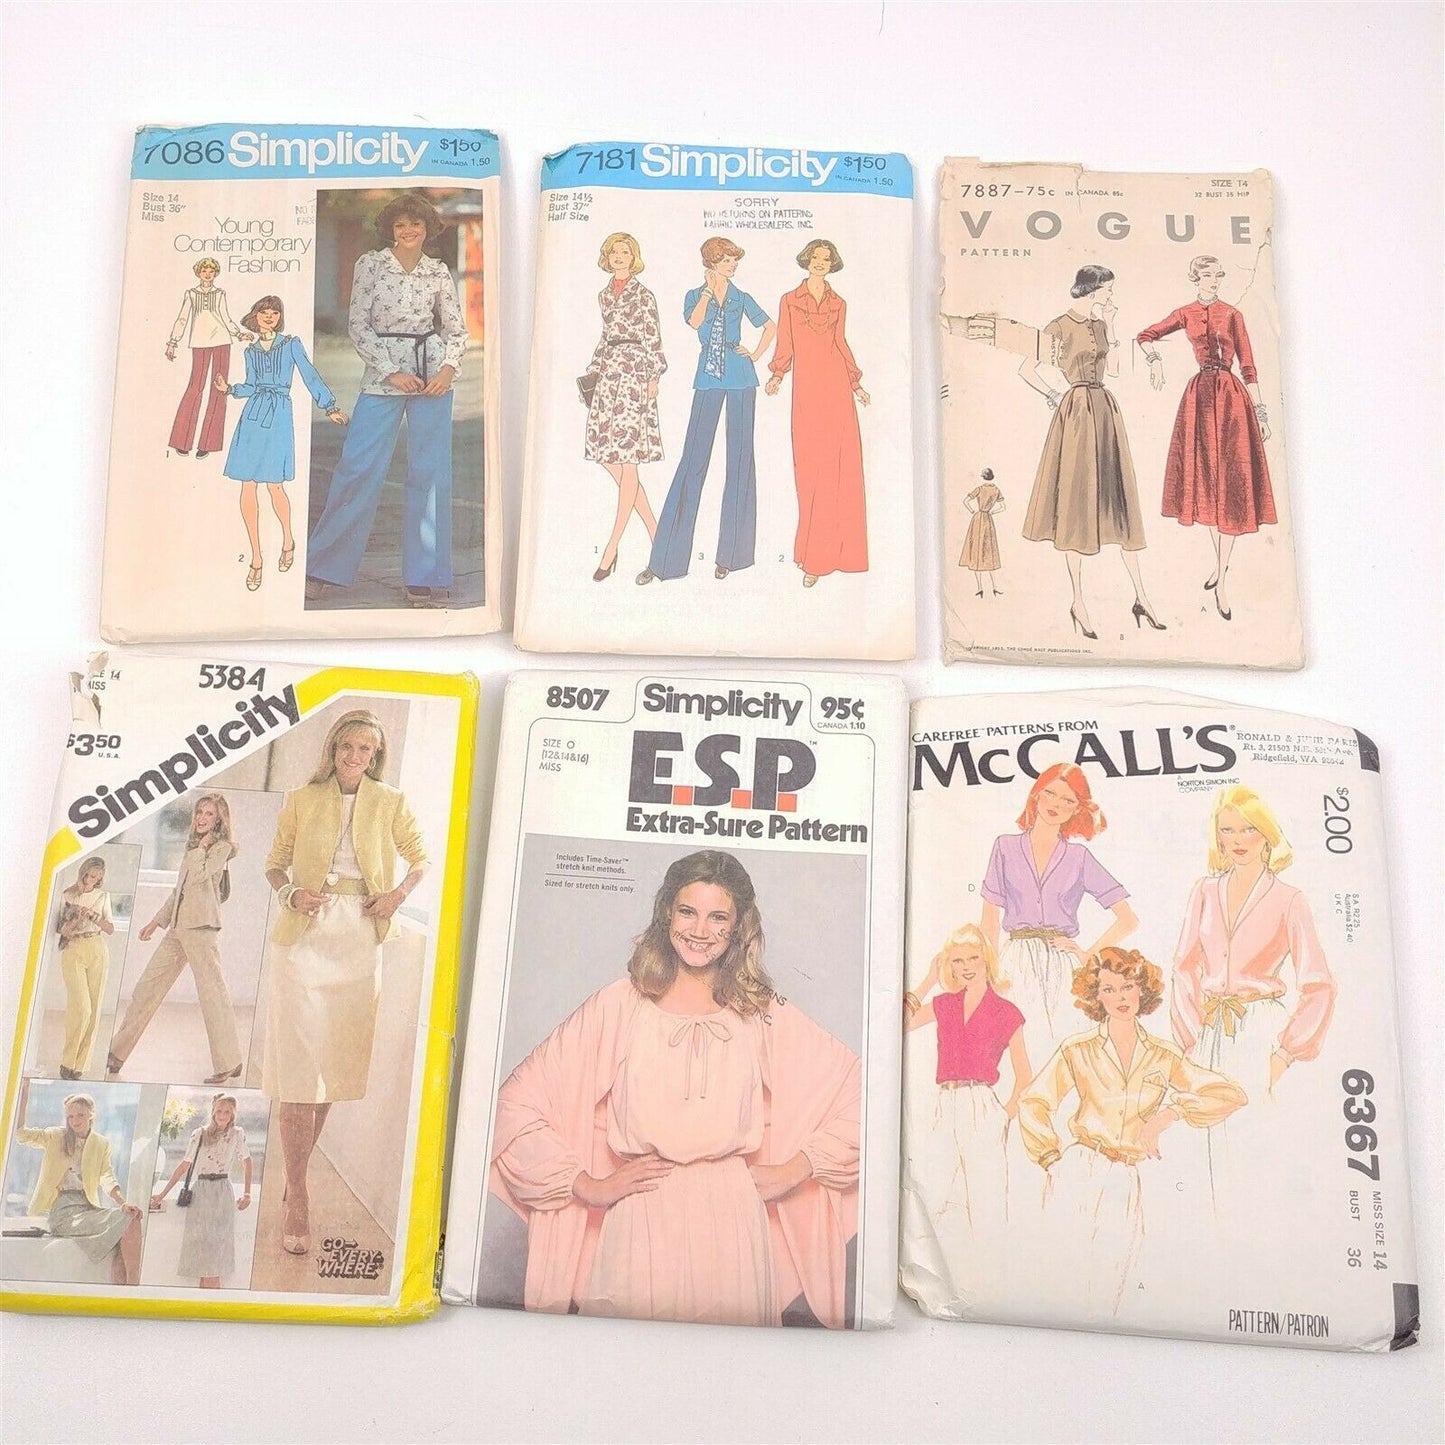 6 Vtg Sewing Patterns Womens Size 14 Vogue McCall's Simplicity Dresses Shirts